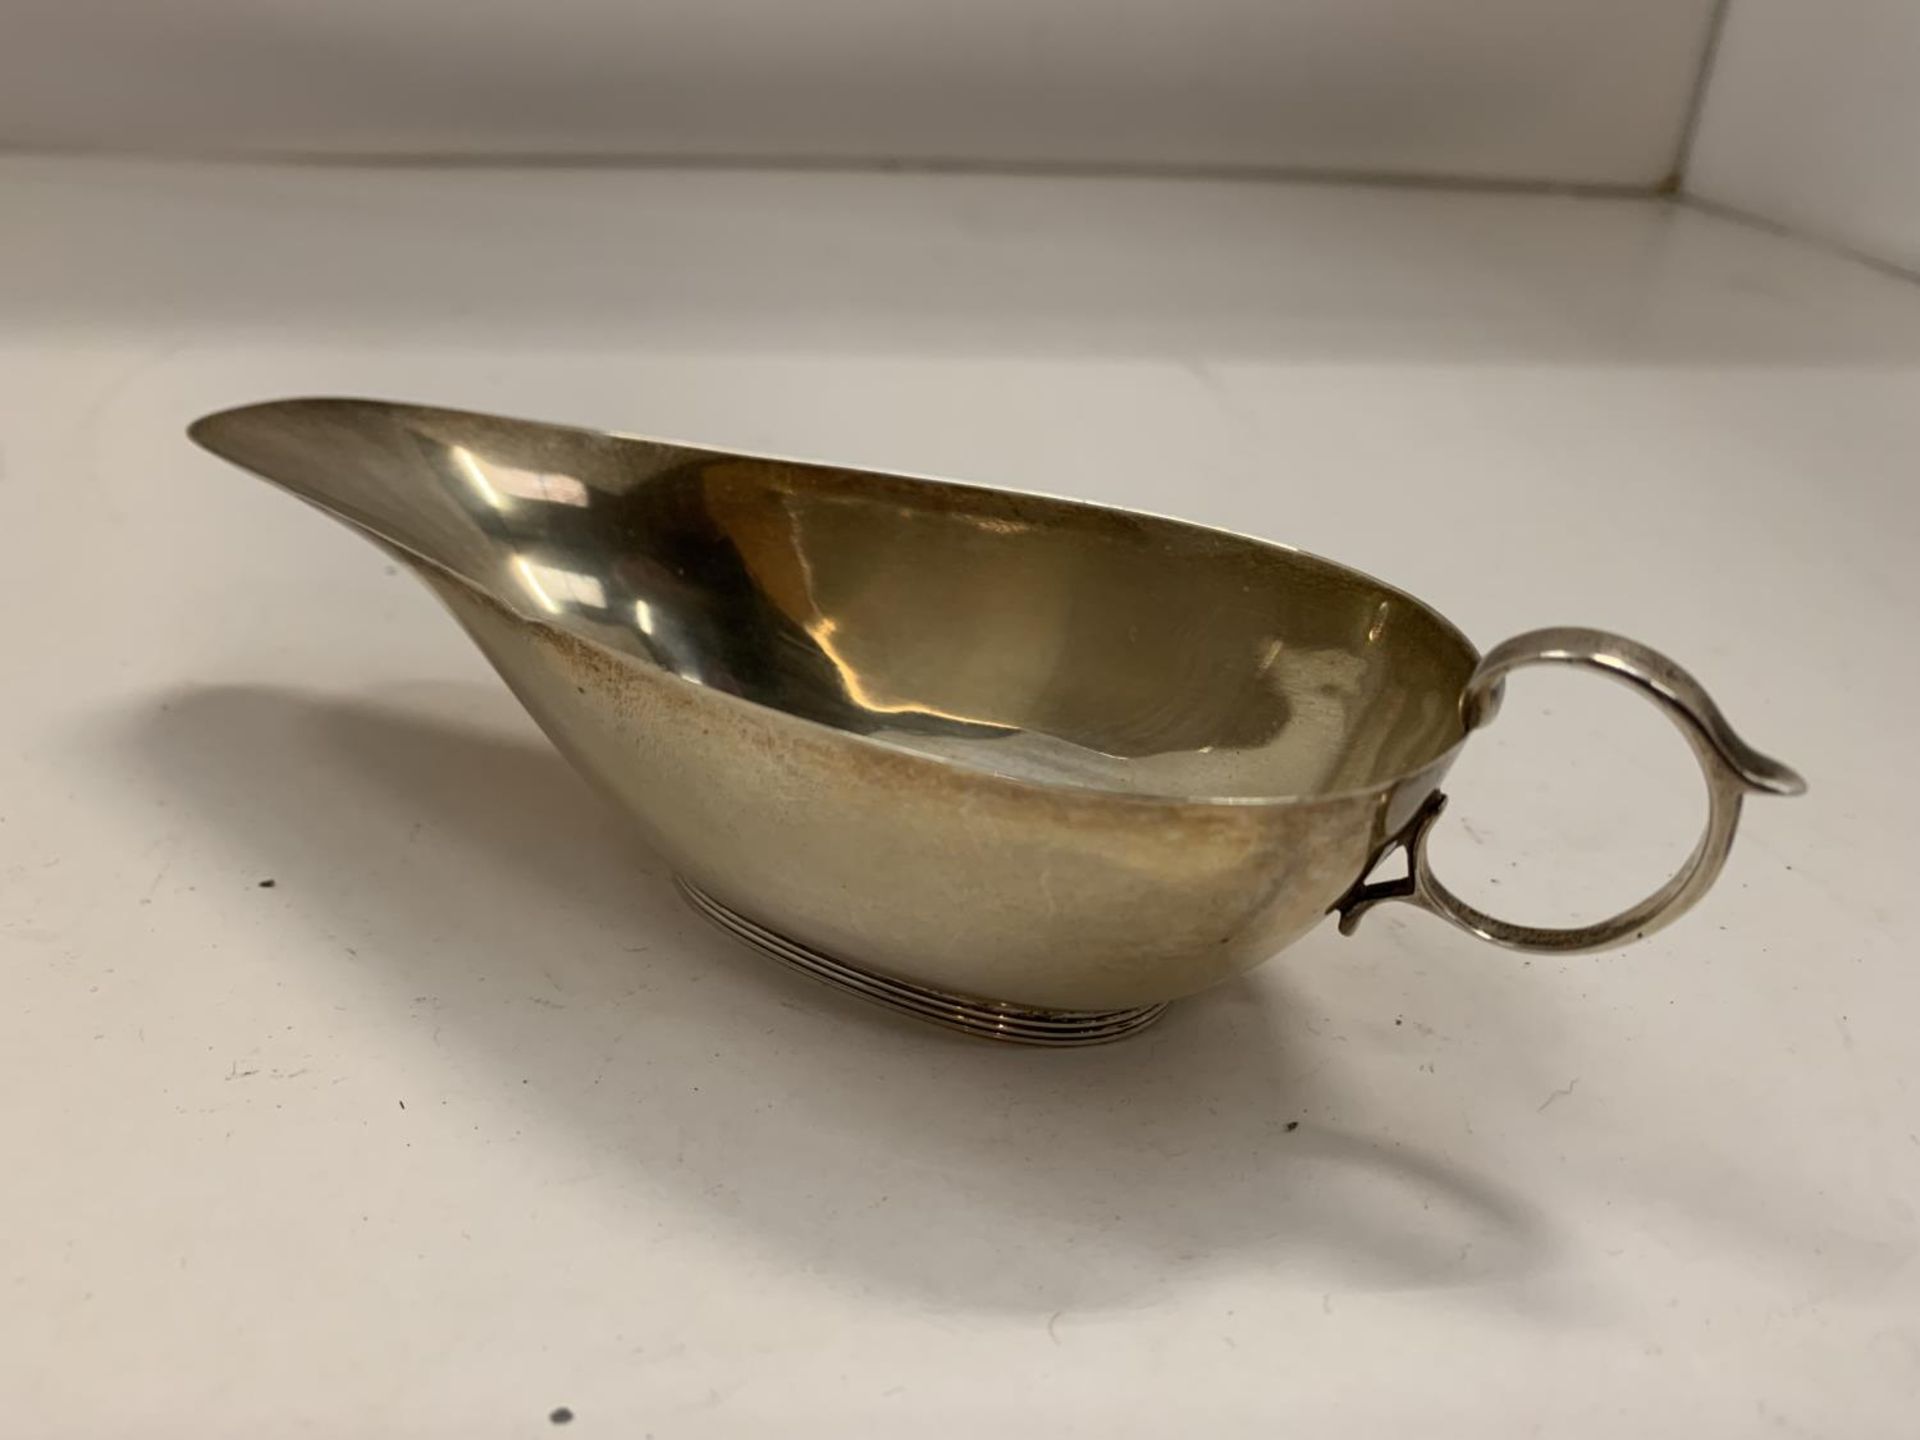 A HALLMARKED BIRMINGHAM SILVER PAP BOAT GROSS WEIGHT 64.8 GRAMS - Image 2 of 4